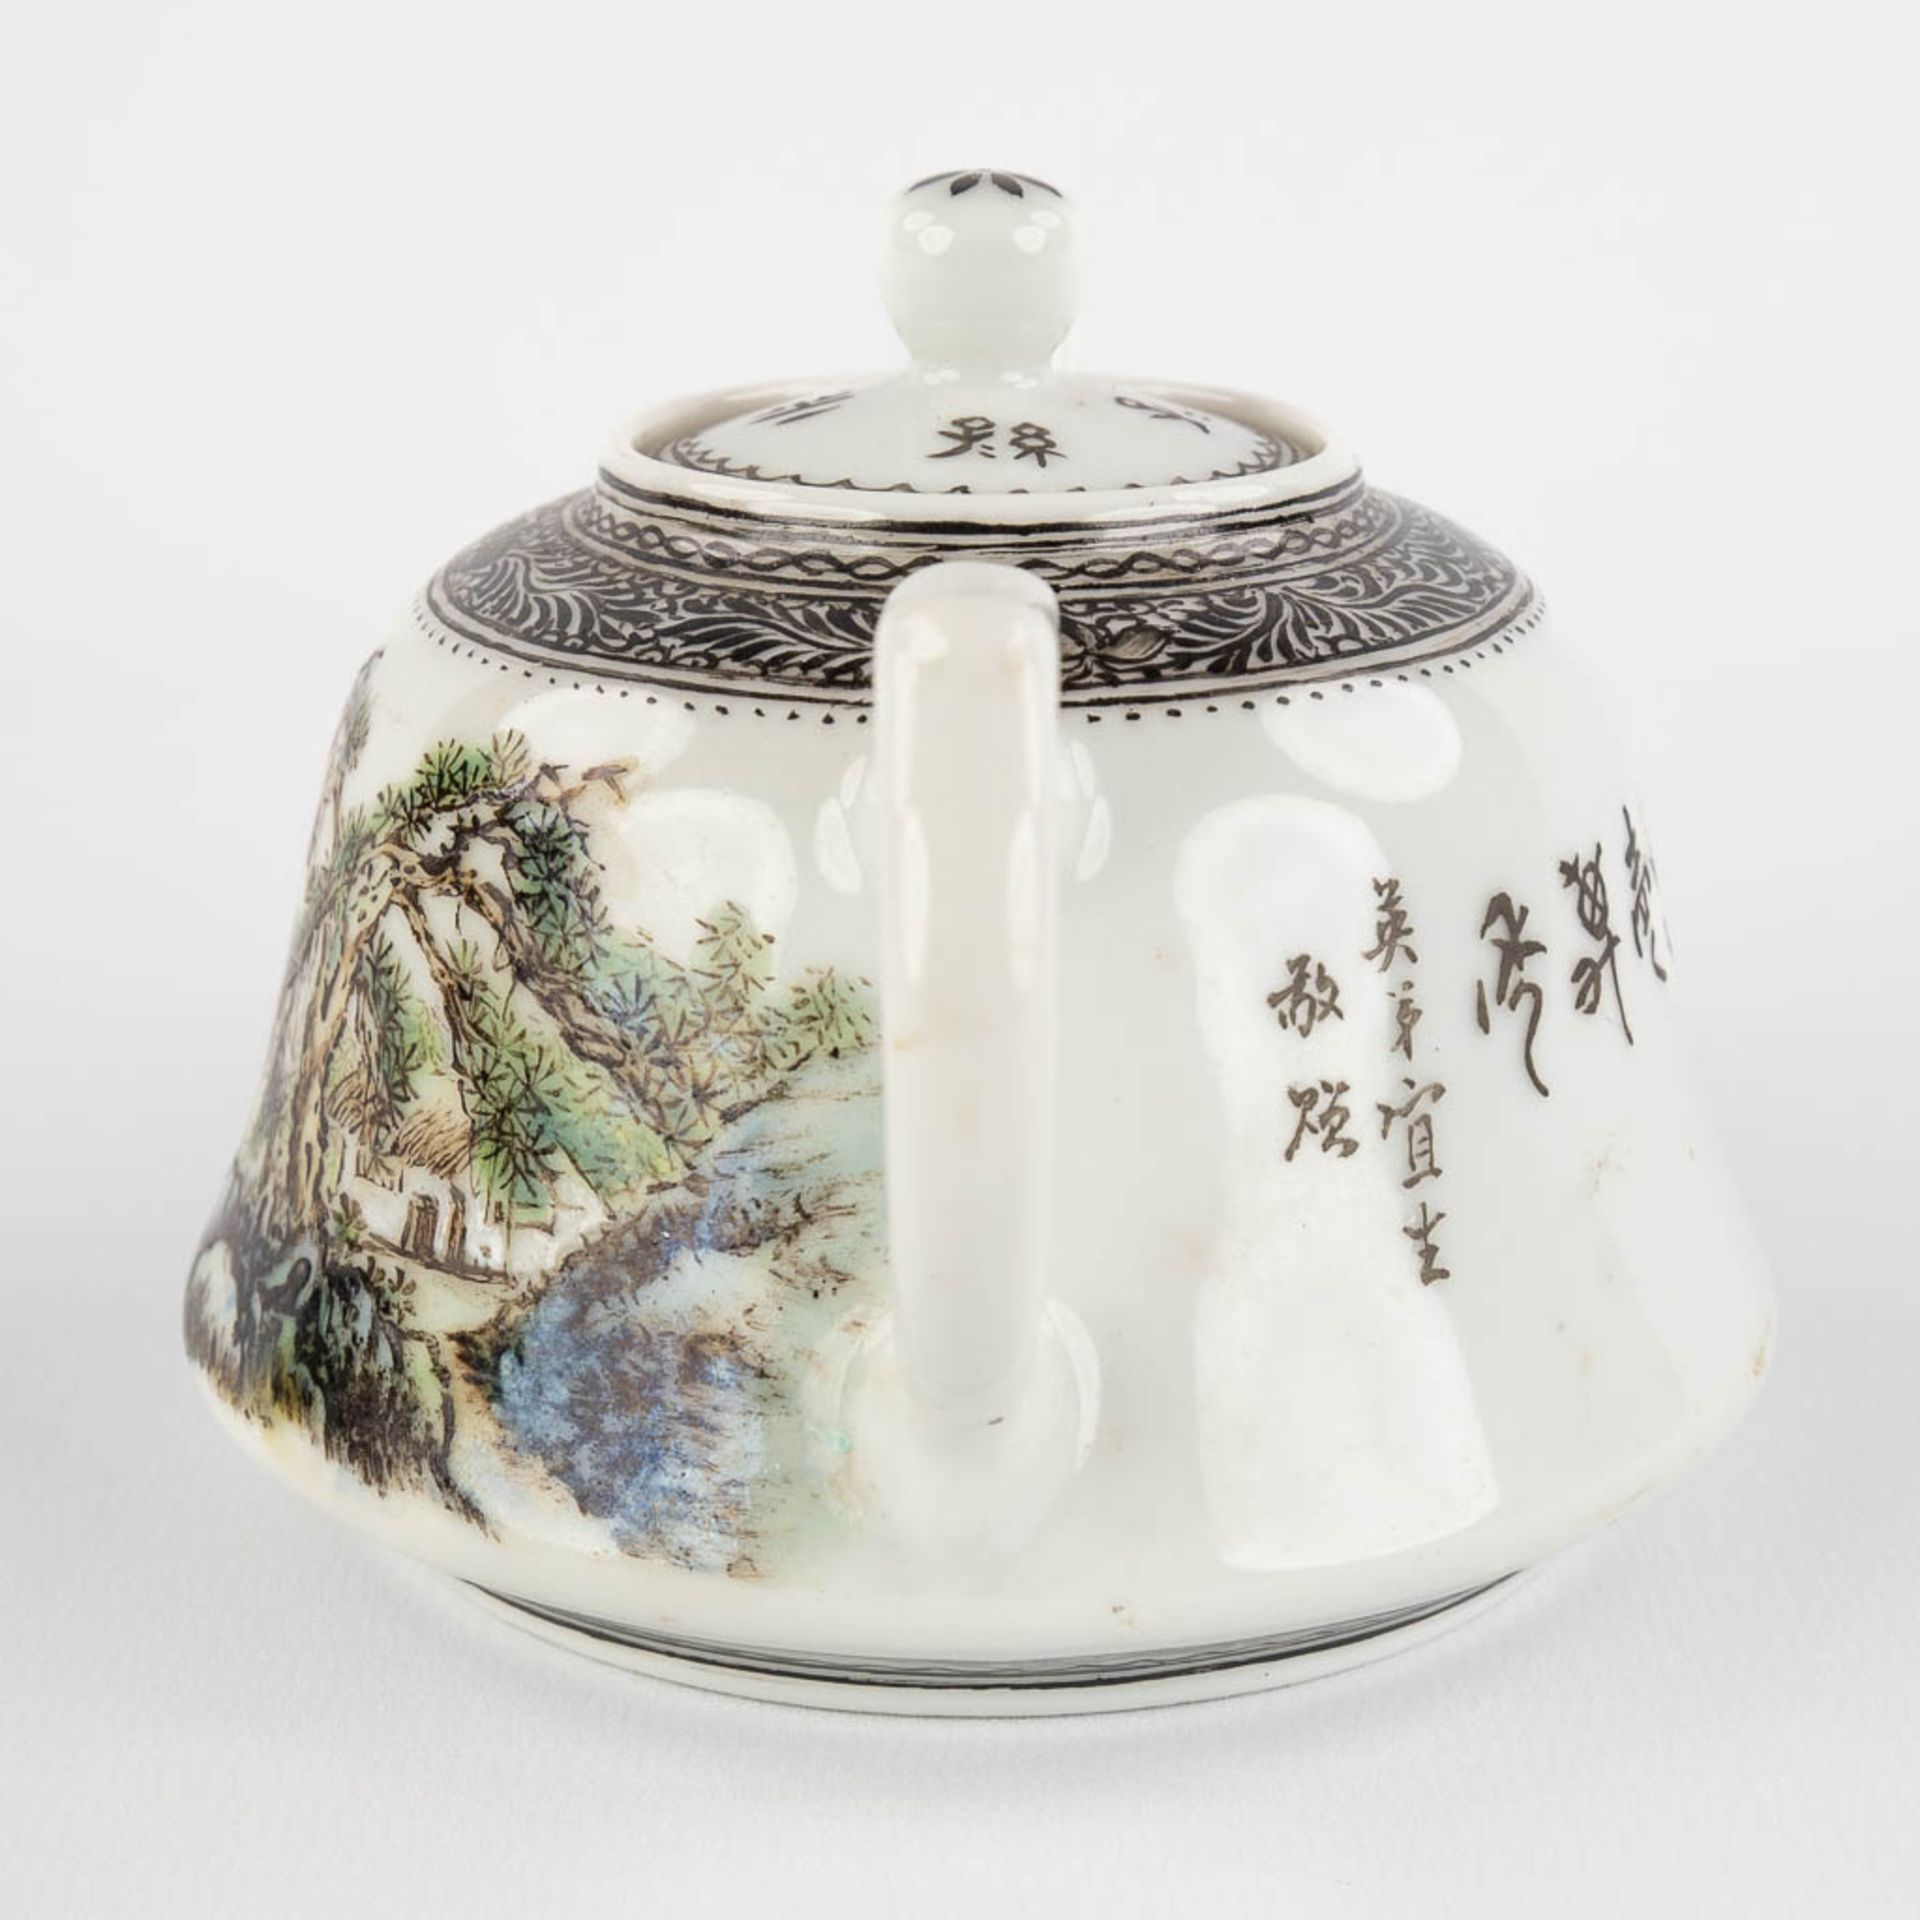 A Chinese teapot with landscape decor, 20th C. (D:11 x W:15 x H:9 cm) - Image 6 of 14